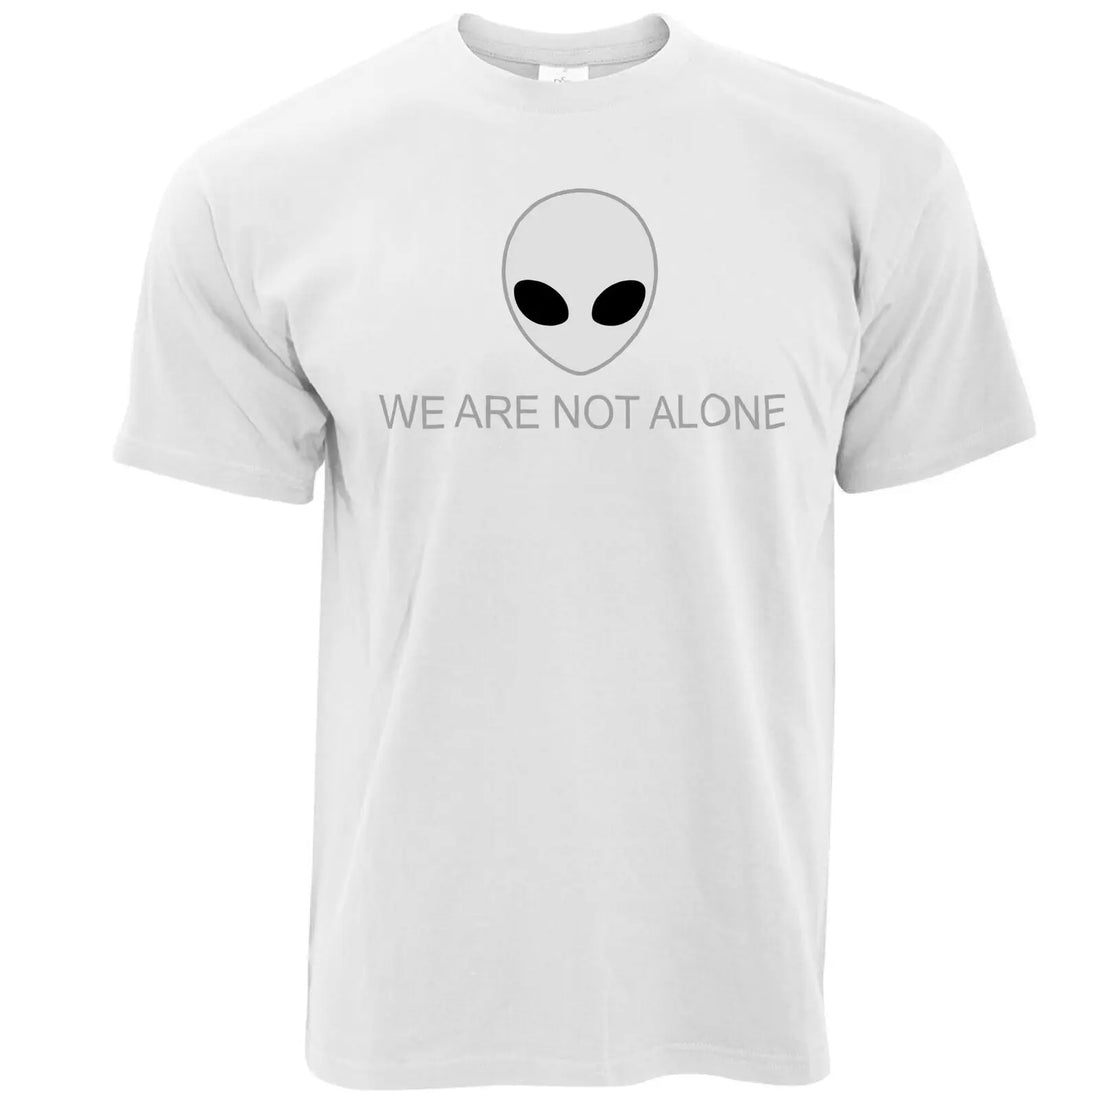 Alien Head T Shirt We Are Not Alone Slogan Geeky Iconic Sci Fi Ufo Fashion Solid Color Men T Shirt Sleeveless T Shirt